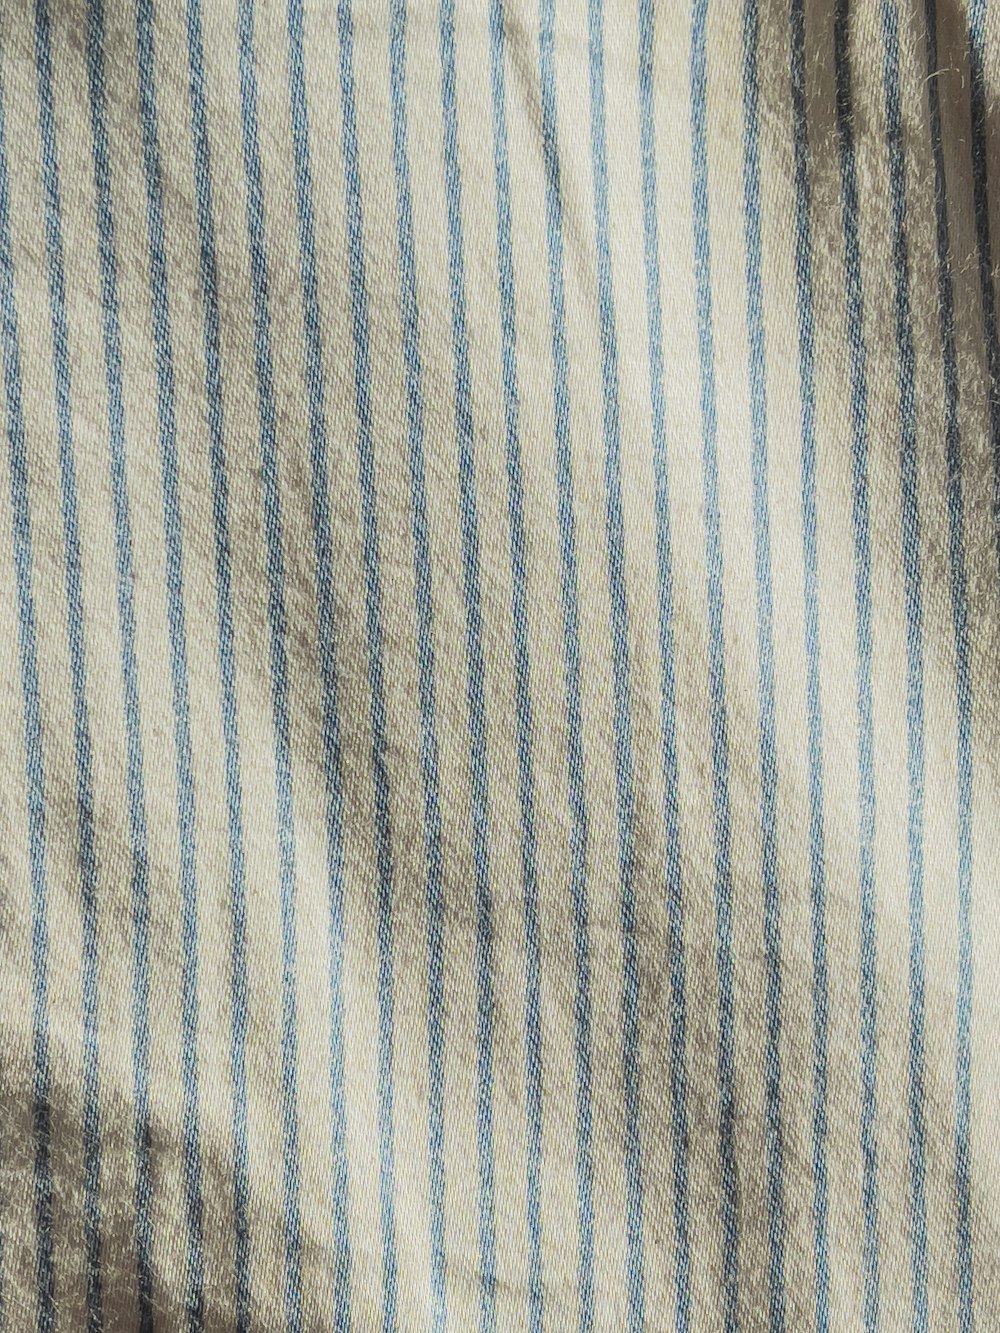 white and blue striped textile